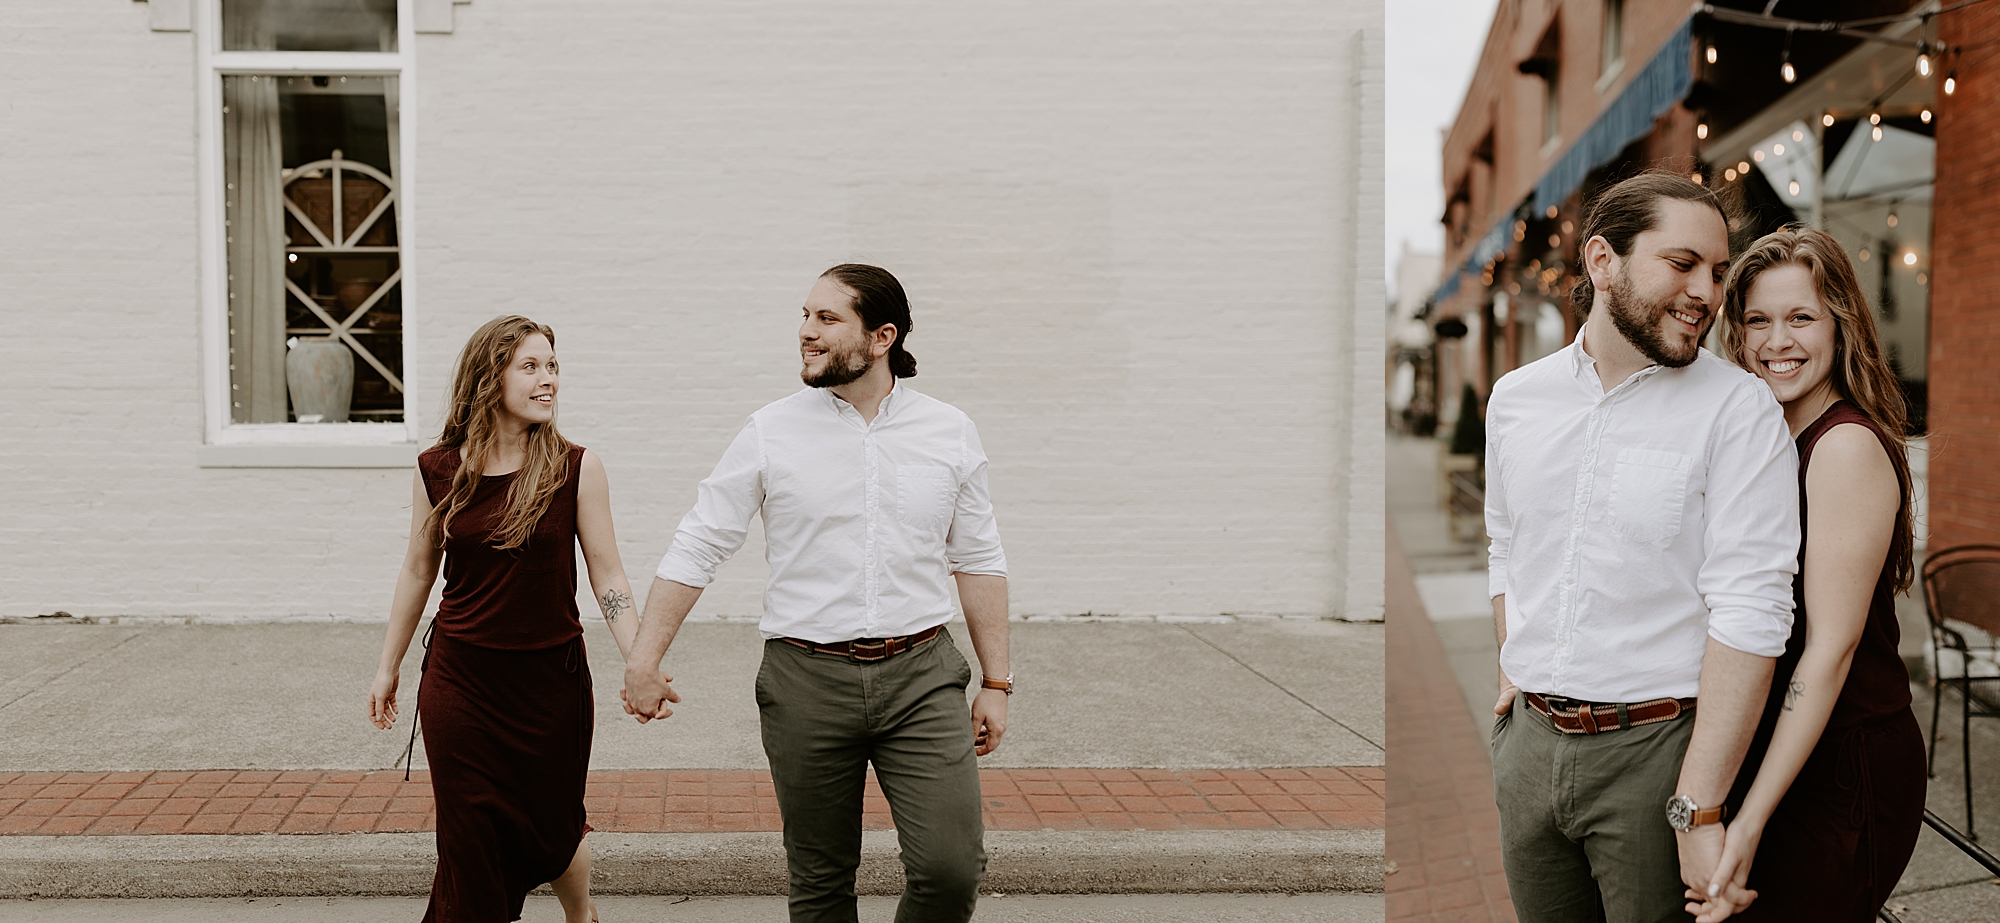 downtown Franklin, TN engagement photos